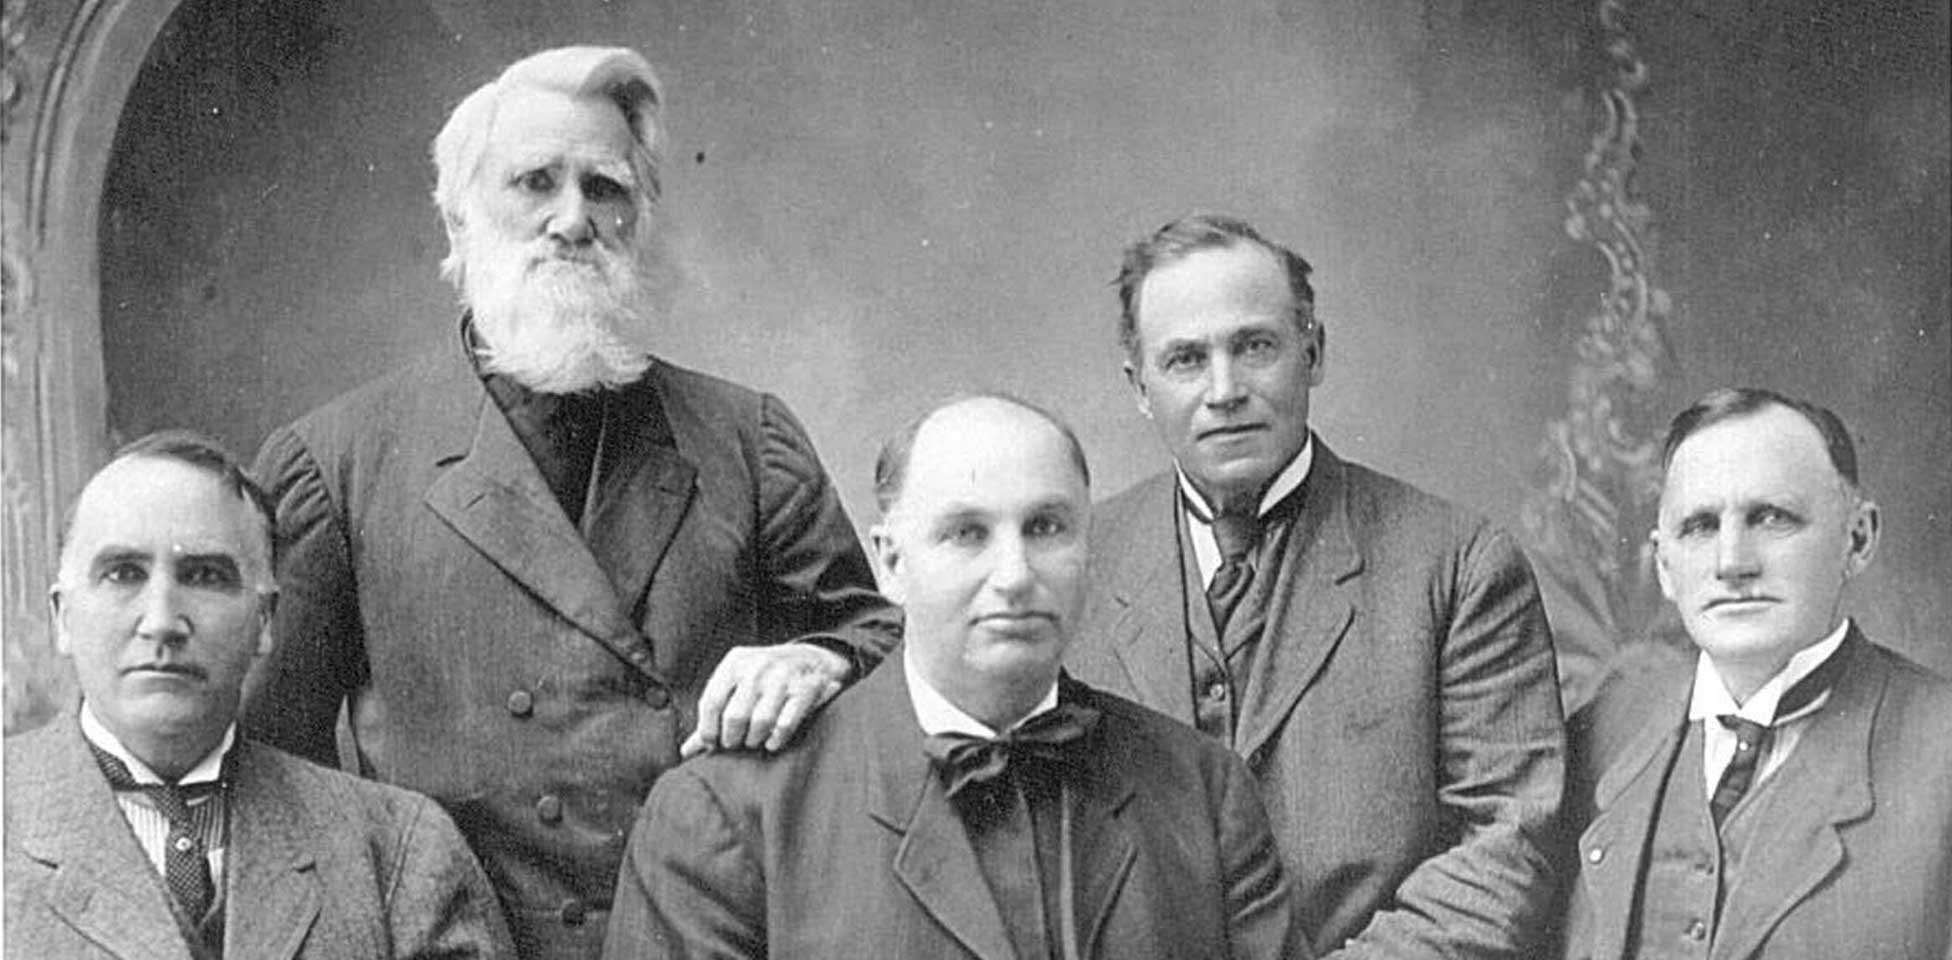 Historical photo of the Case founding members